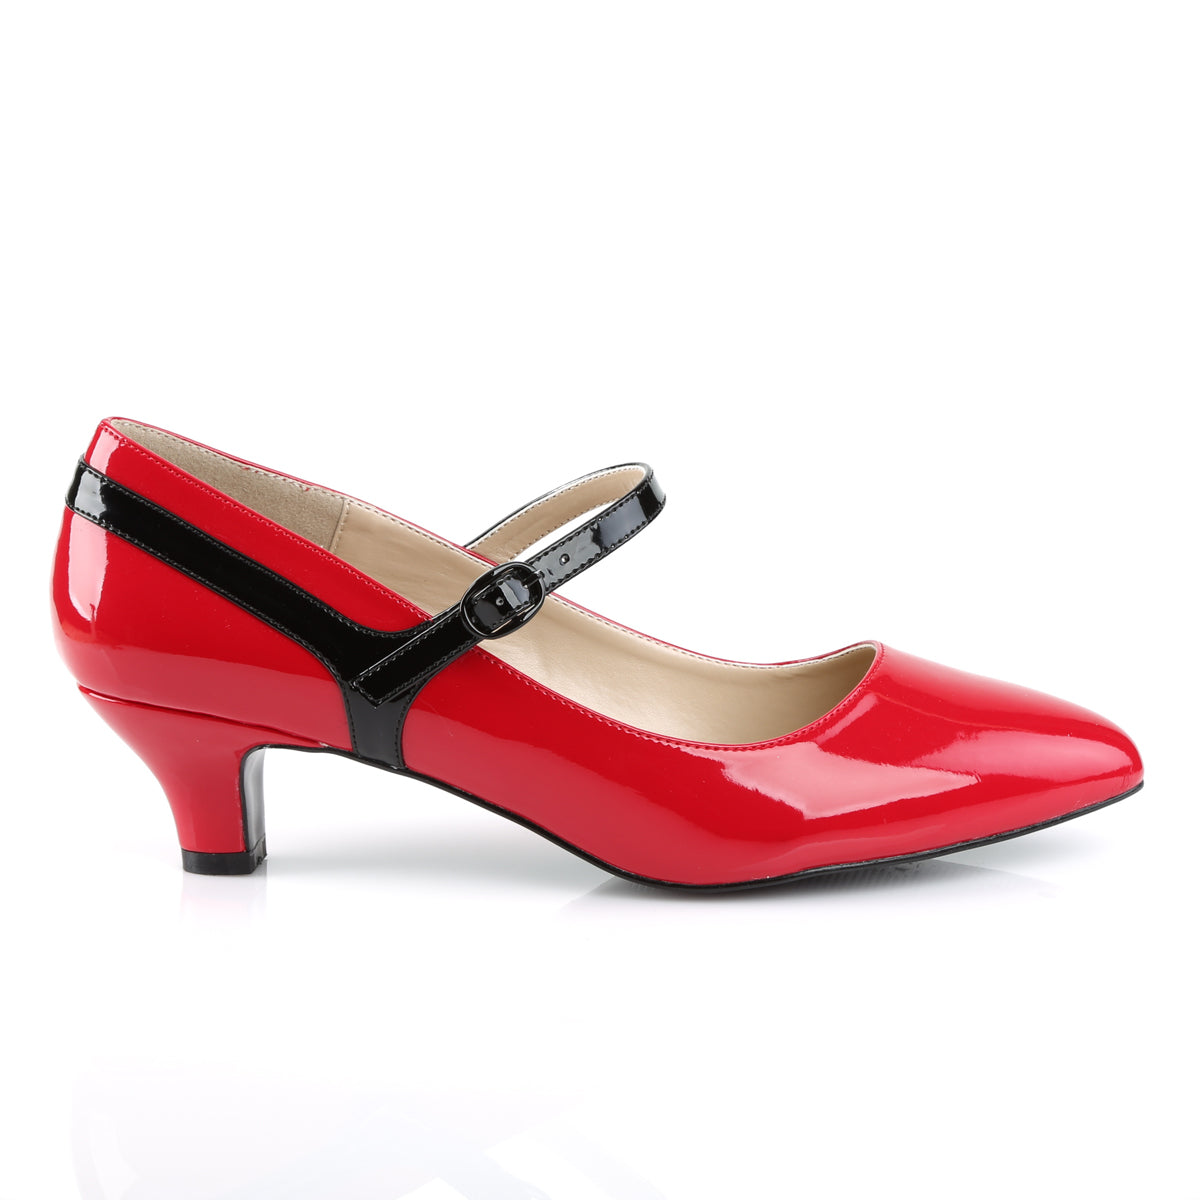 Pleaser Pink Label Womens Pumps FAB-425 Red-Blk Pat